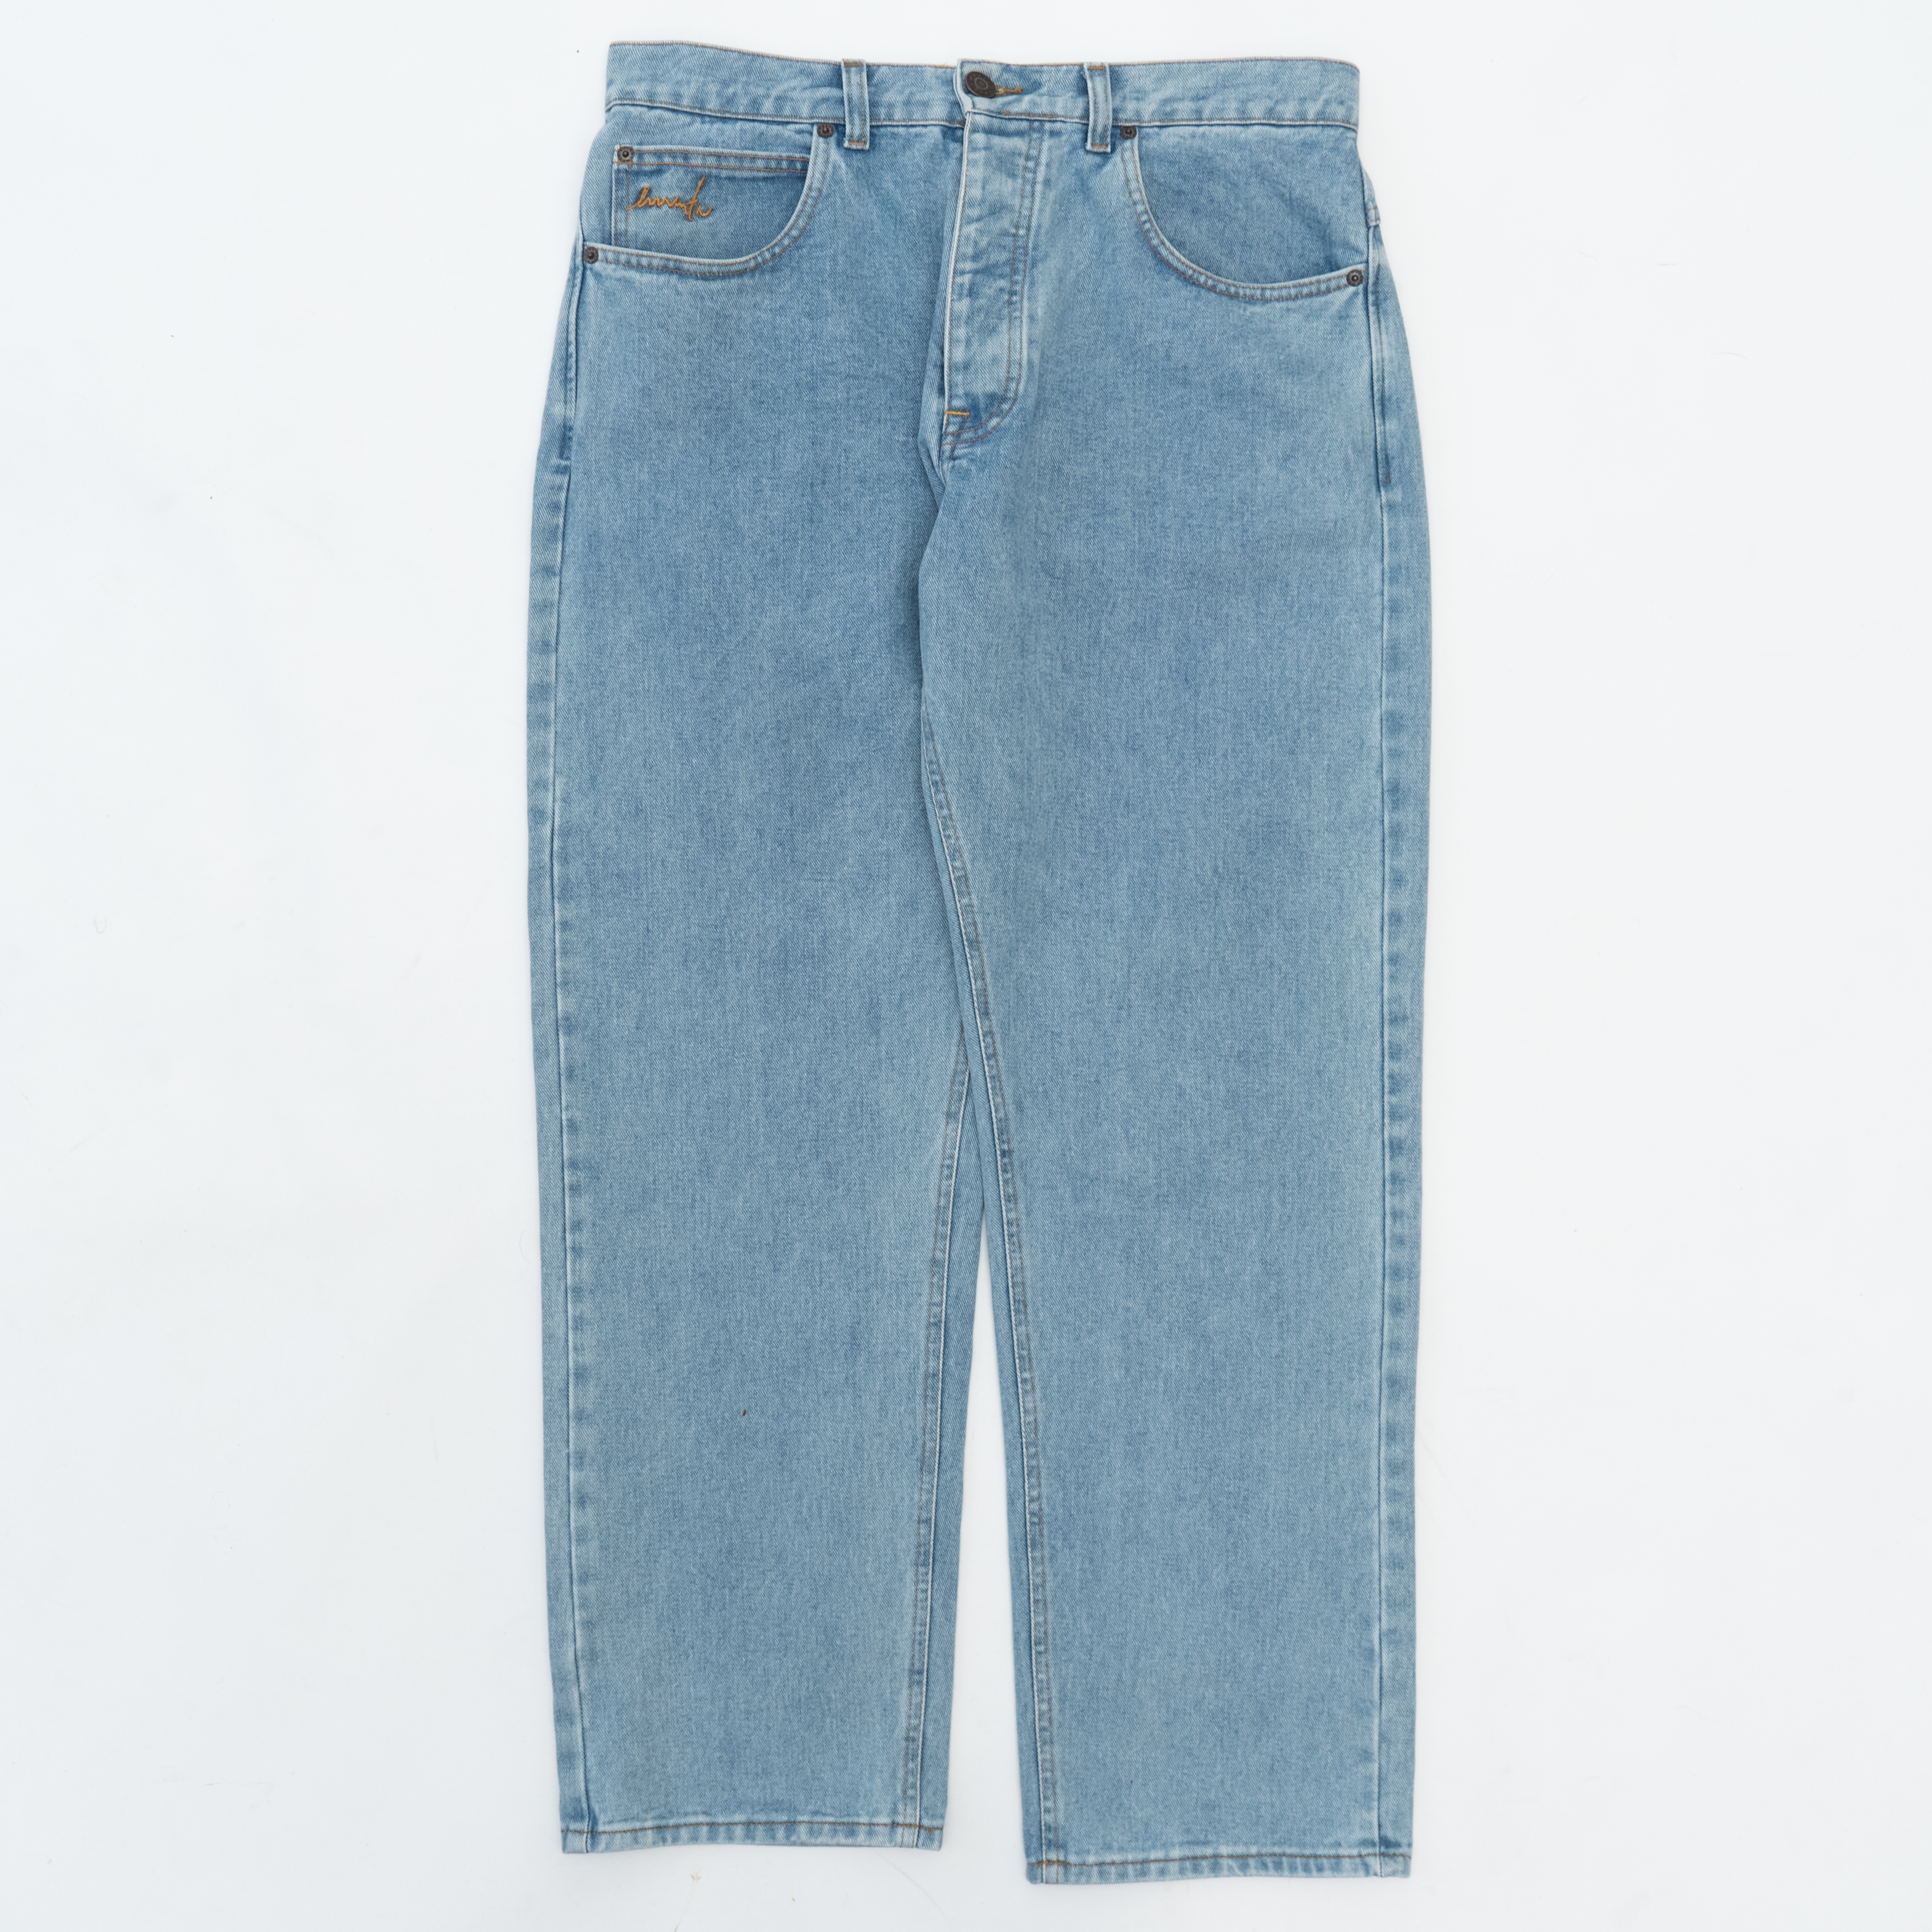 Baby Jeans Relaxed Fit Pants Light Blue Washed